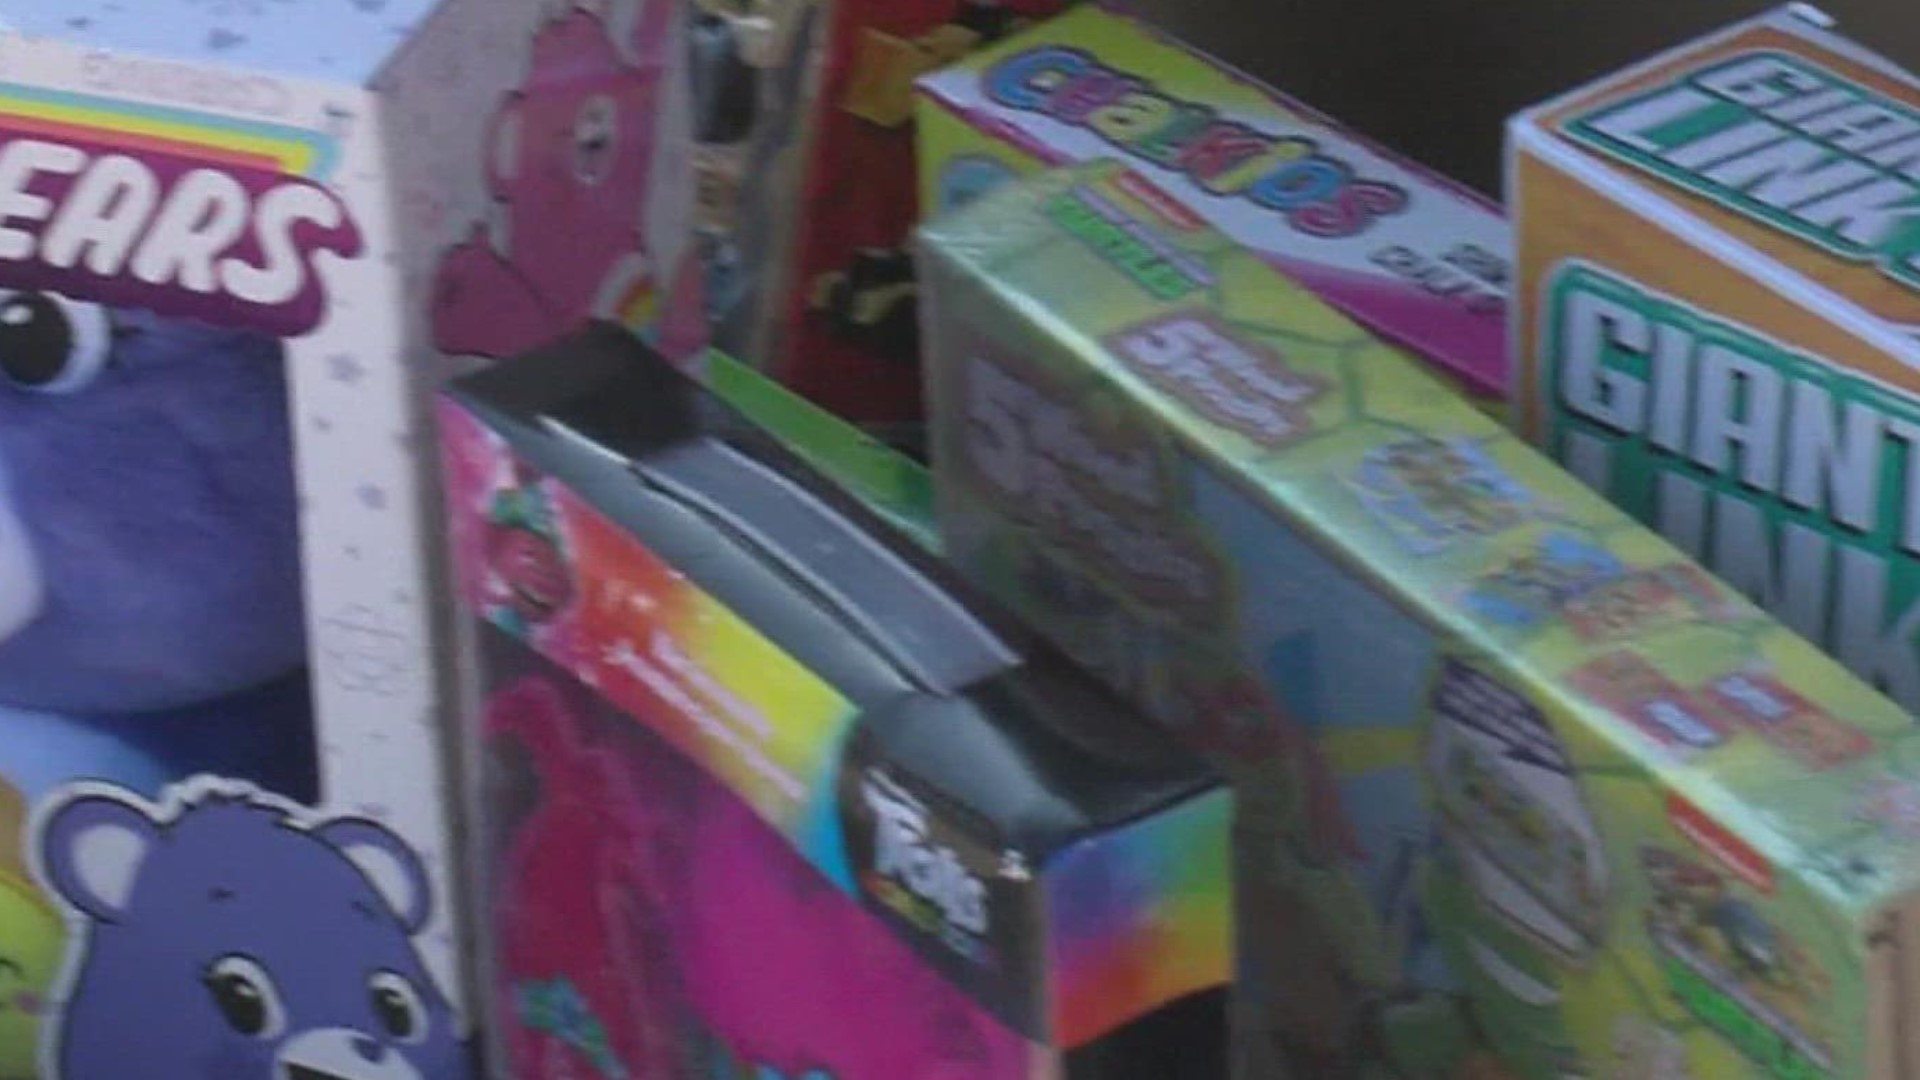 On Sunday, the organizations teamed up and collected hundreds of toys for kids in need.